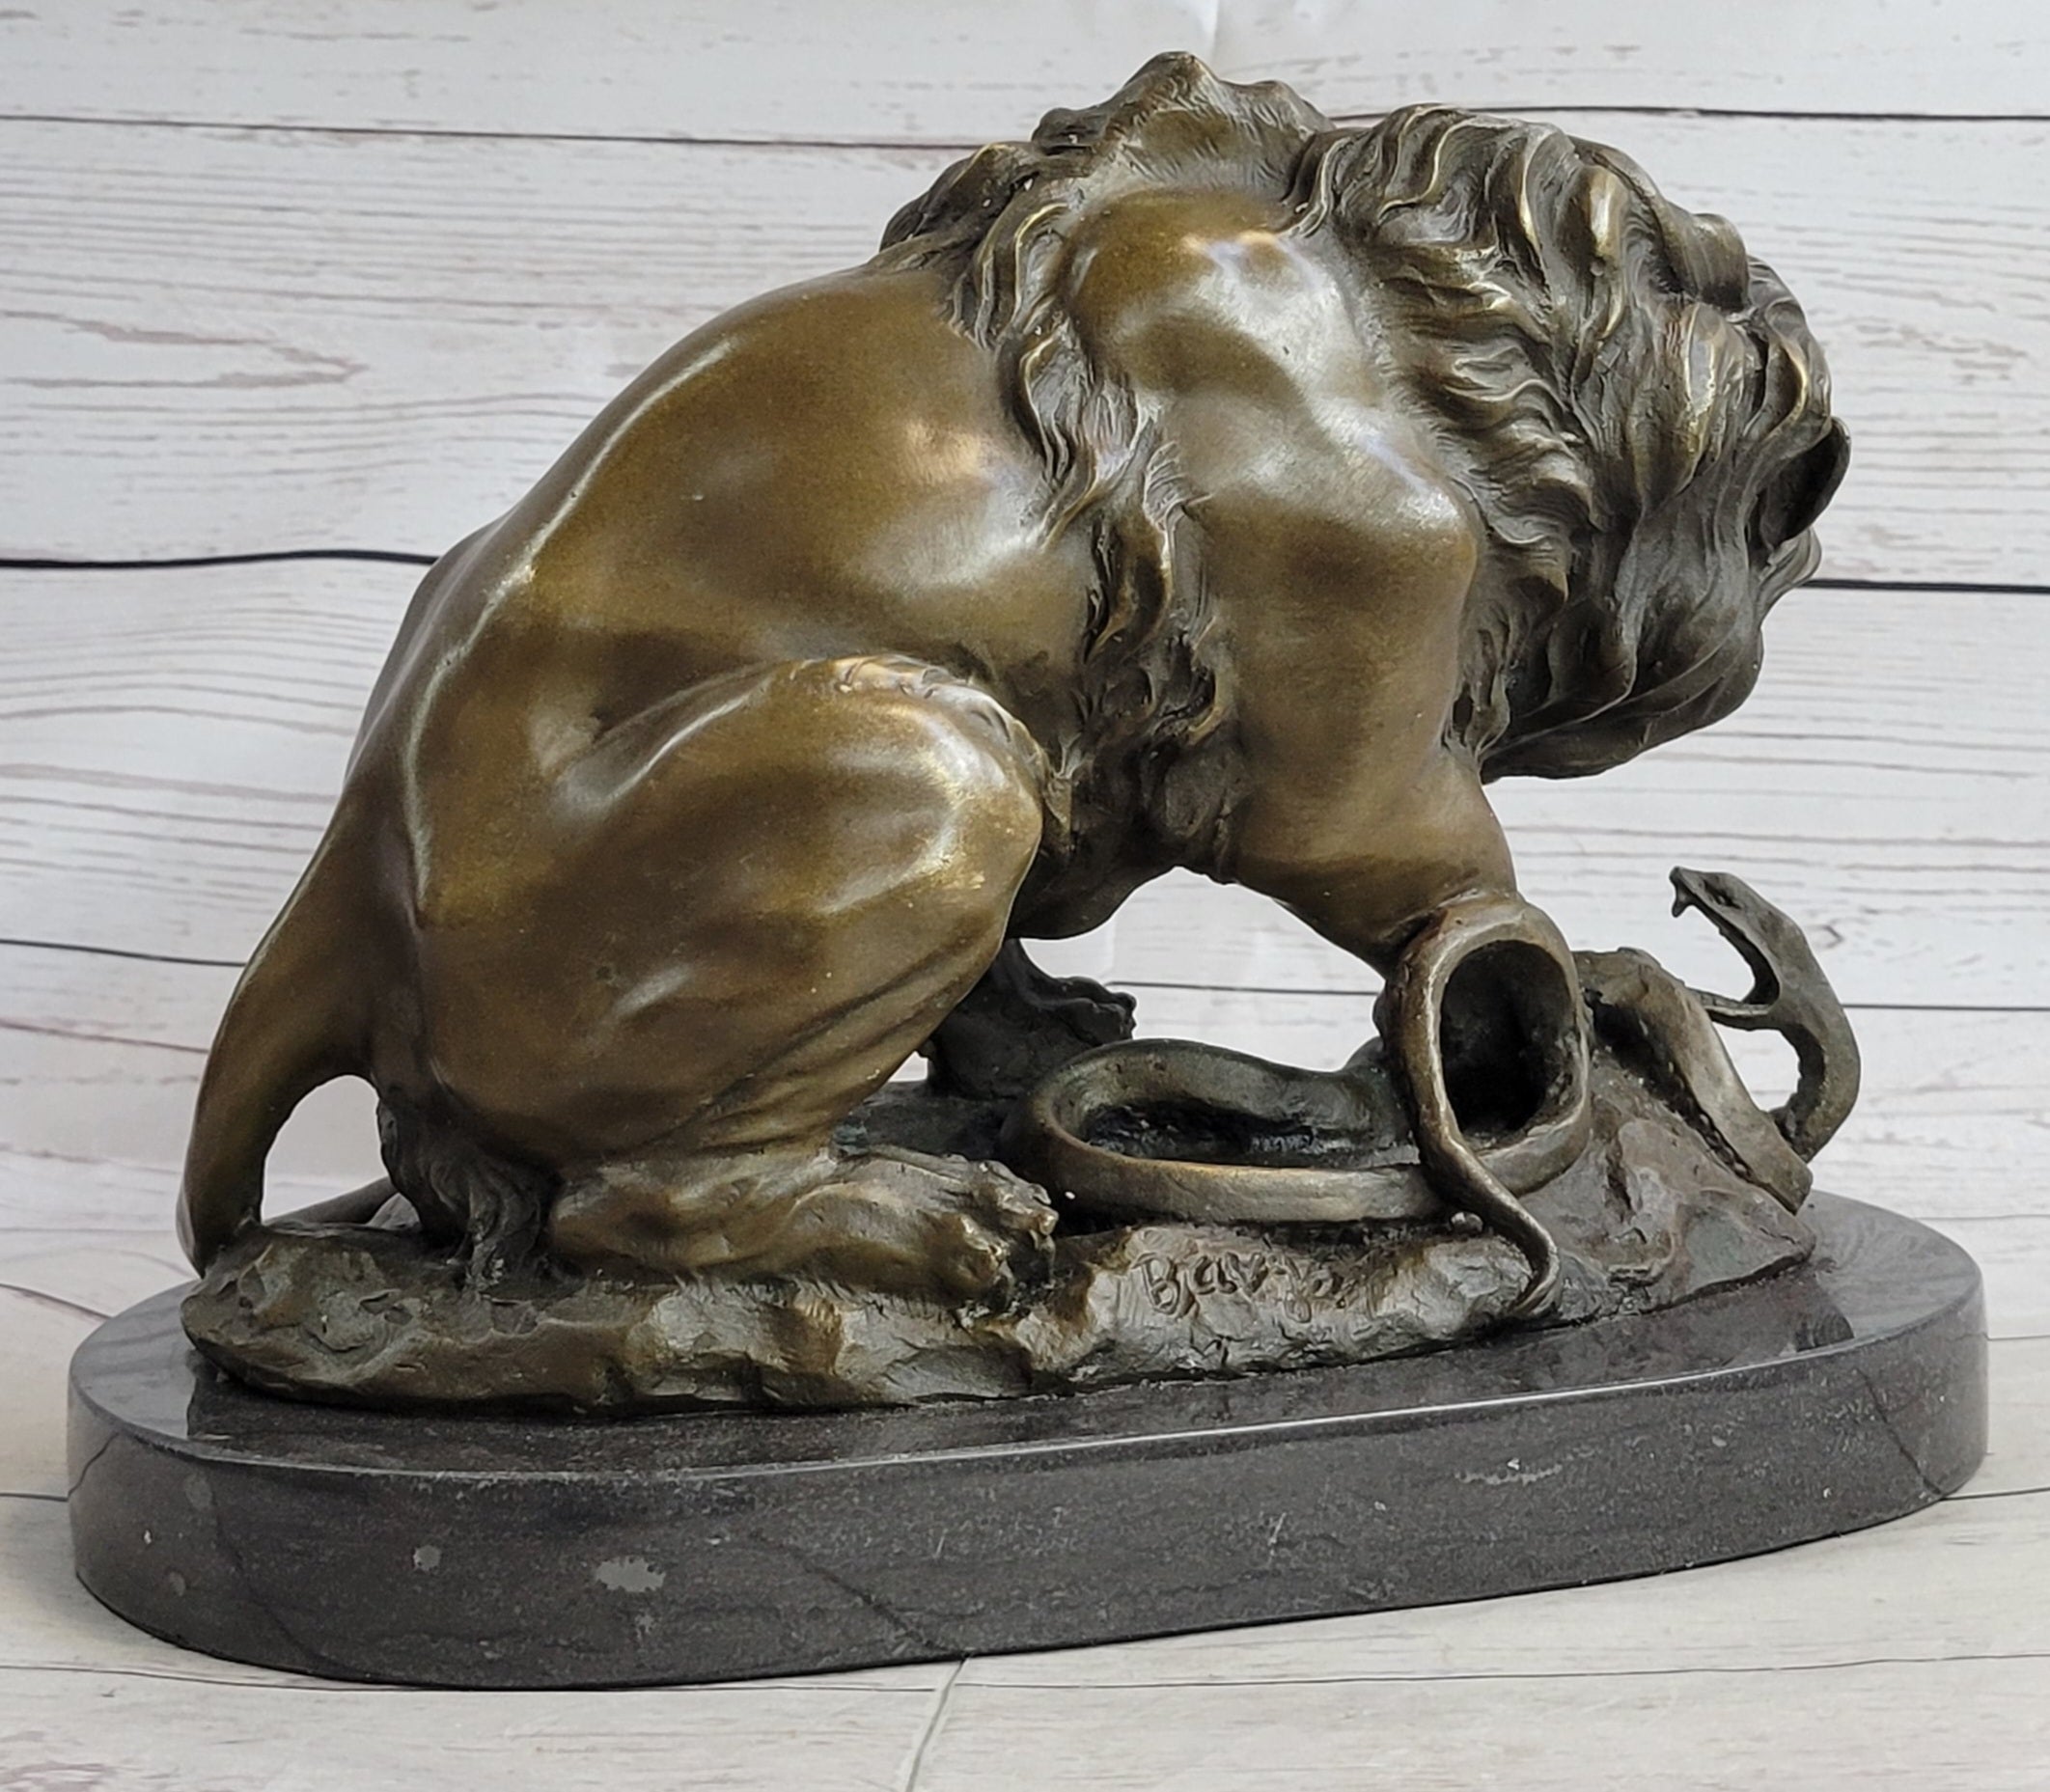 Bronze Lion and Snake Sculpture on a solid marble base, Art, Ornament.